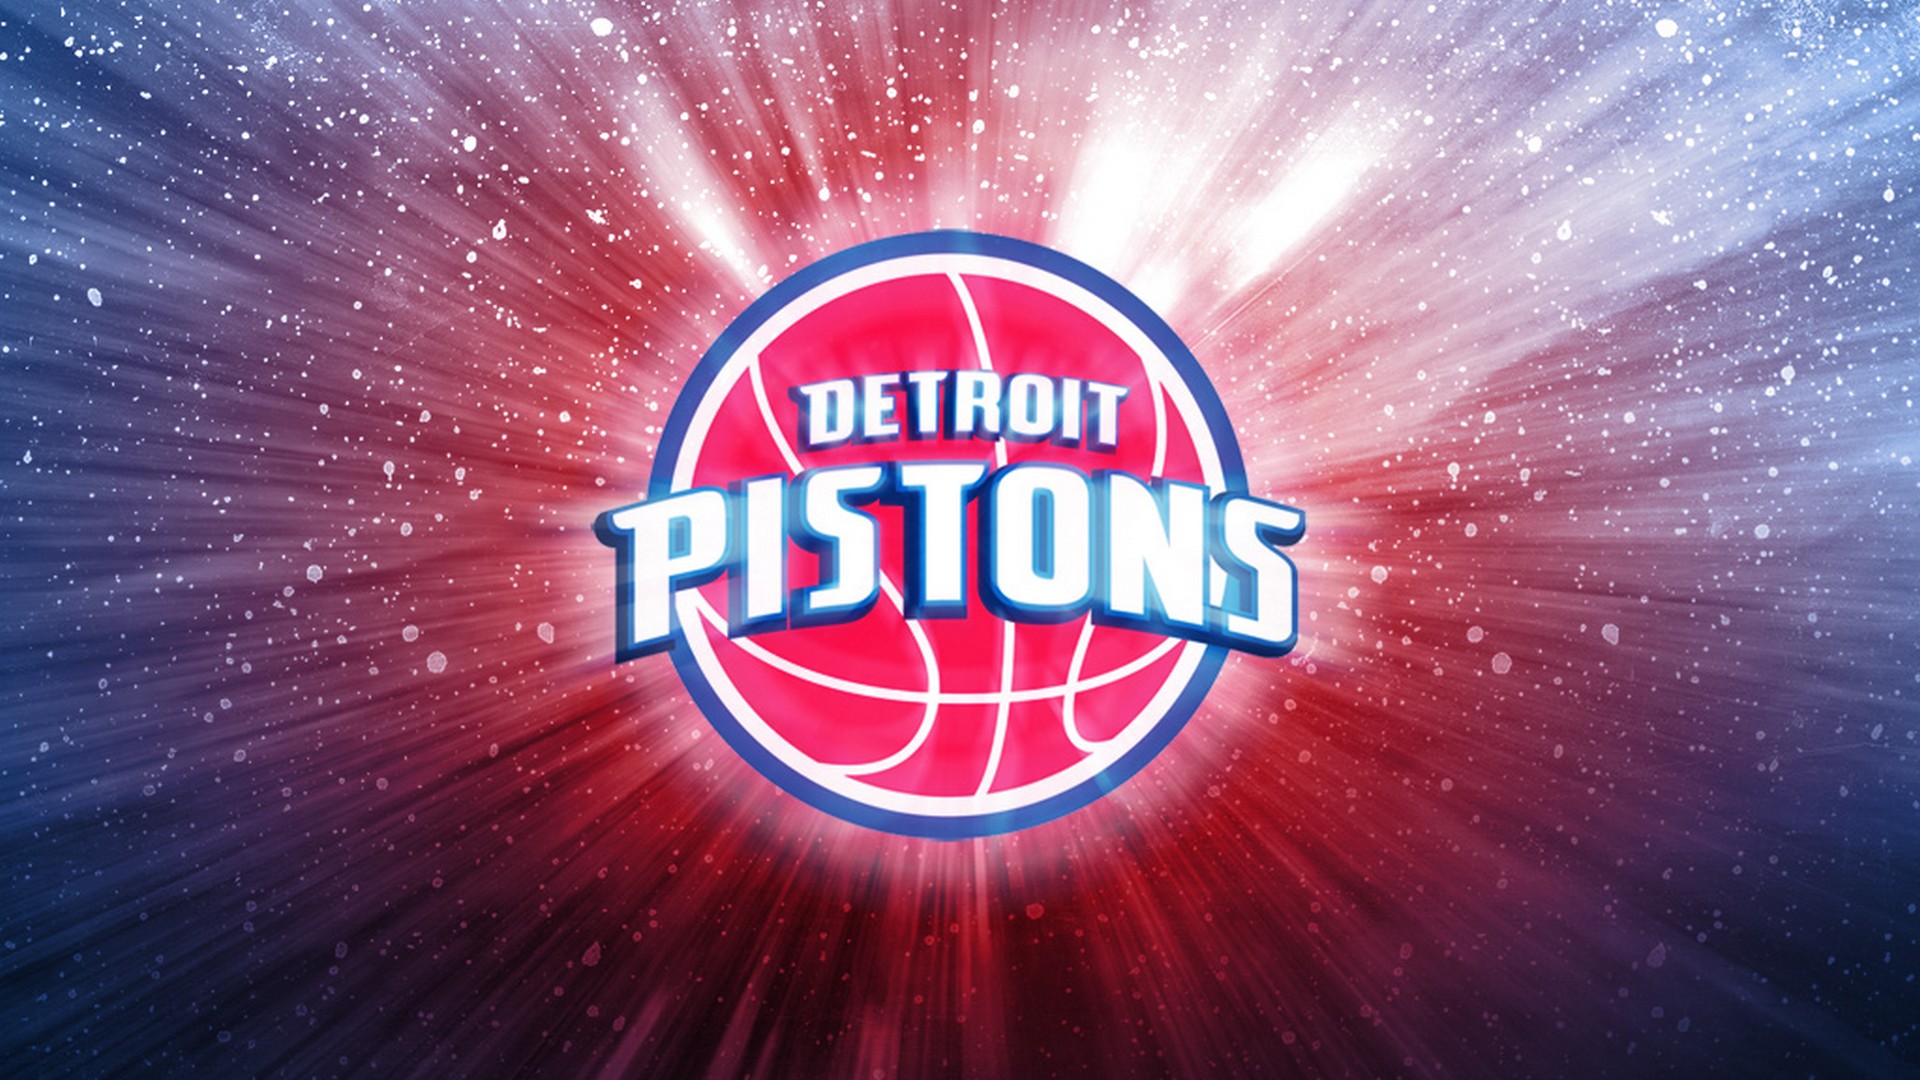 HD Backgrounds Detroit Pistons Logo with high-resolution 1920x1080 pixel. You can use this wallpaper for your Desktop Computer Backgrounds, Windows or Mac Screensavers, iPhone Lock screen, Tablet or Android and another Mobile Phone device